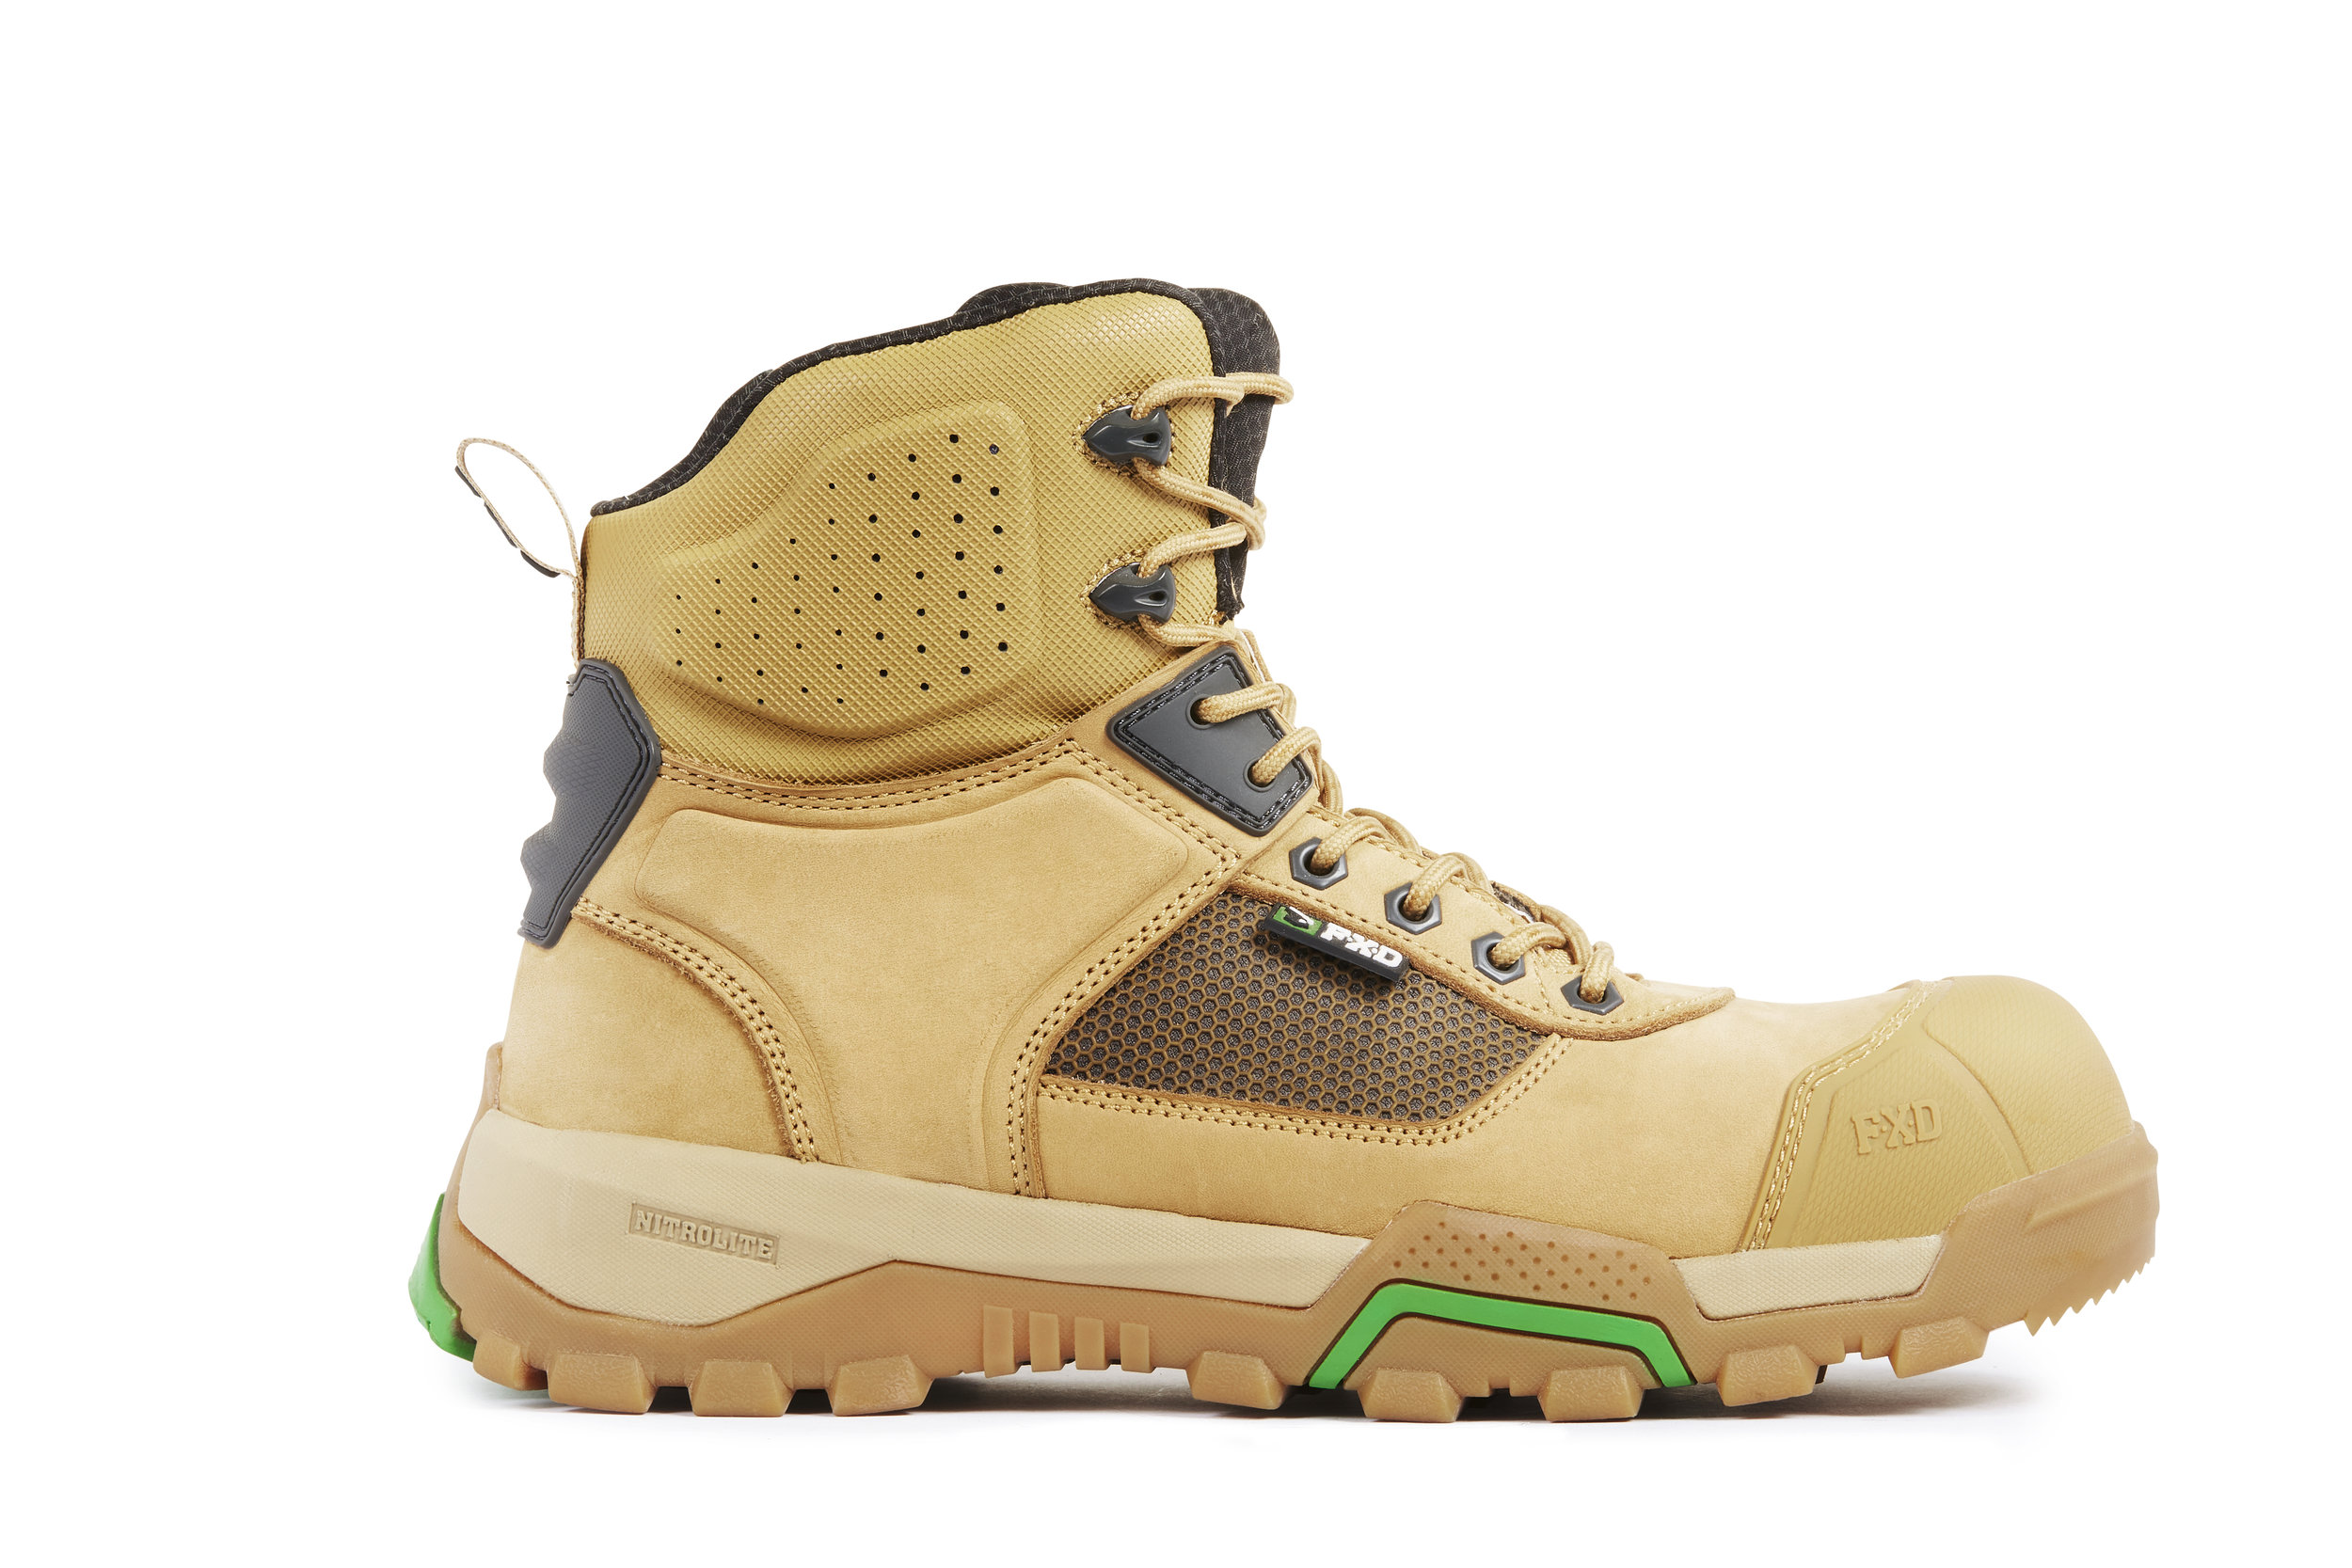 FXD WB-1 work boots (Wheat side view)